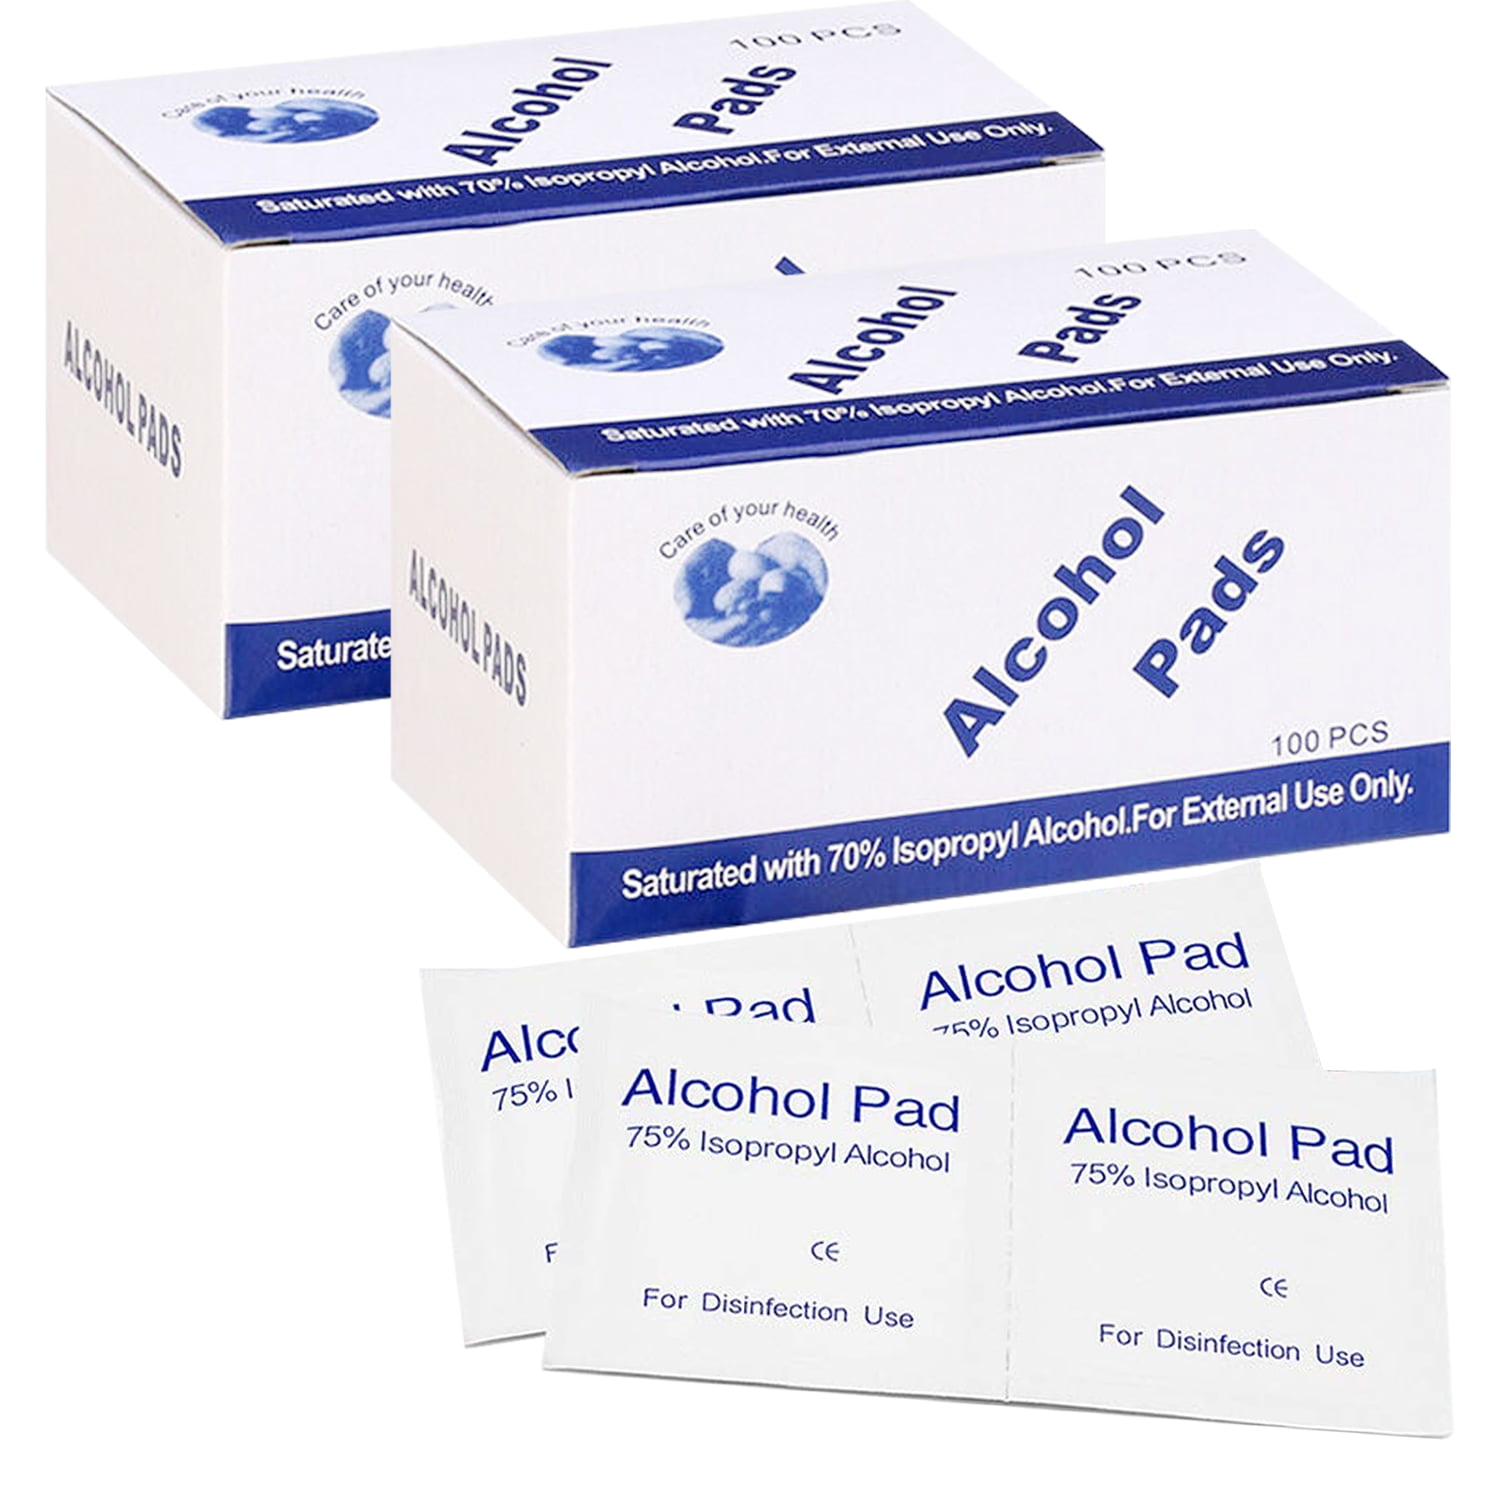 Alcohol Wet Wipes Cleansing for Adults Alco-HOL Pads Hand Swabs Pads Rubbing Wipes Antiseptic Cleaning Sterilization for Family 20X10 PCS